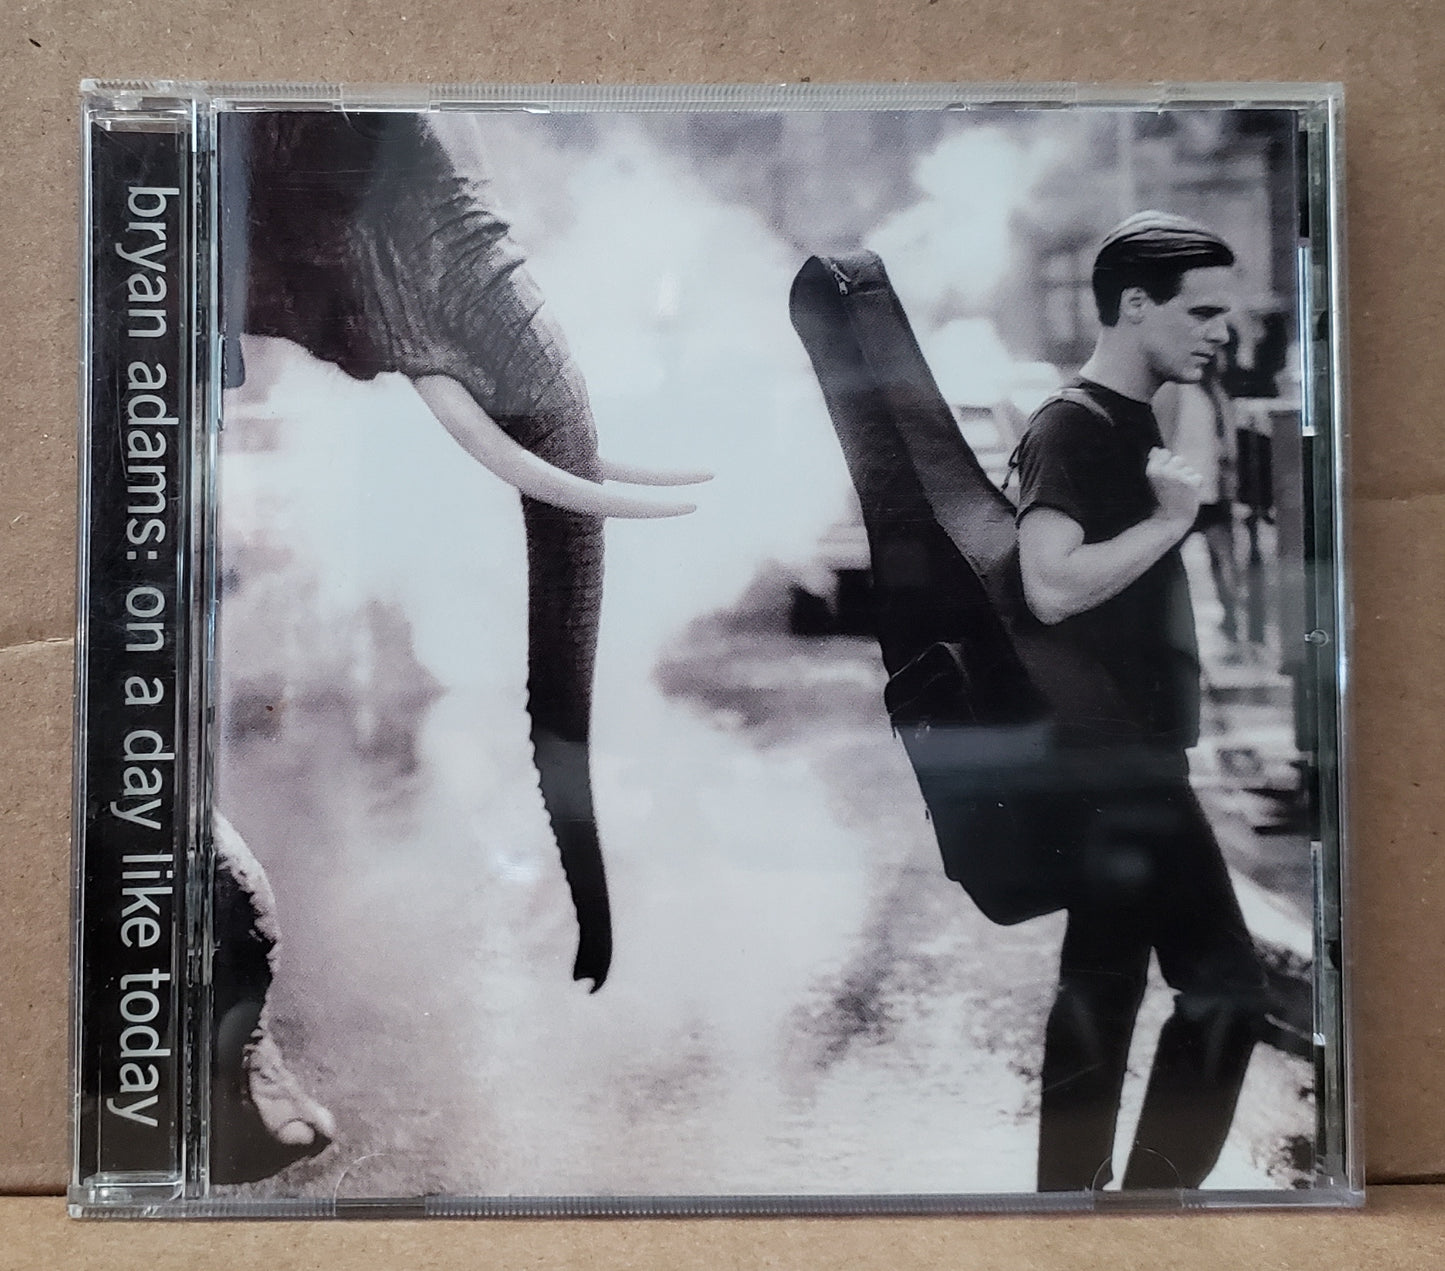 Bryan Adams - On a Day Like Today [1998 Club Edition] [Used CD]